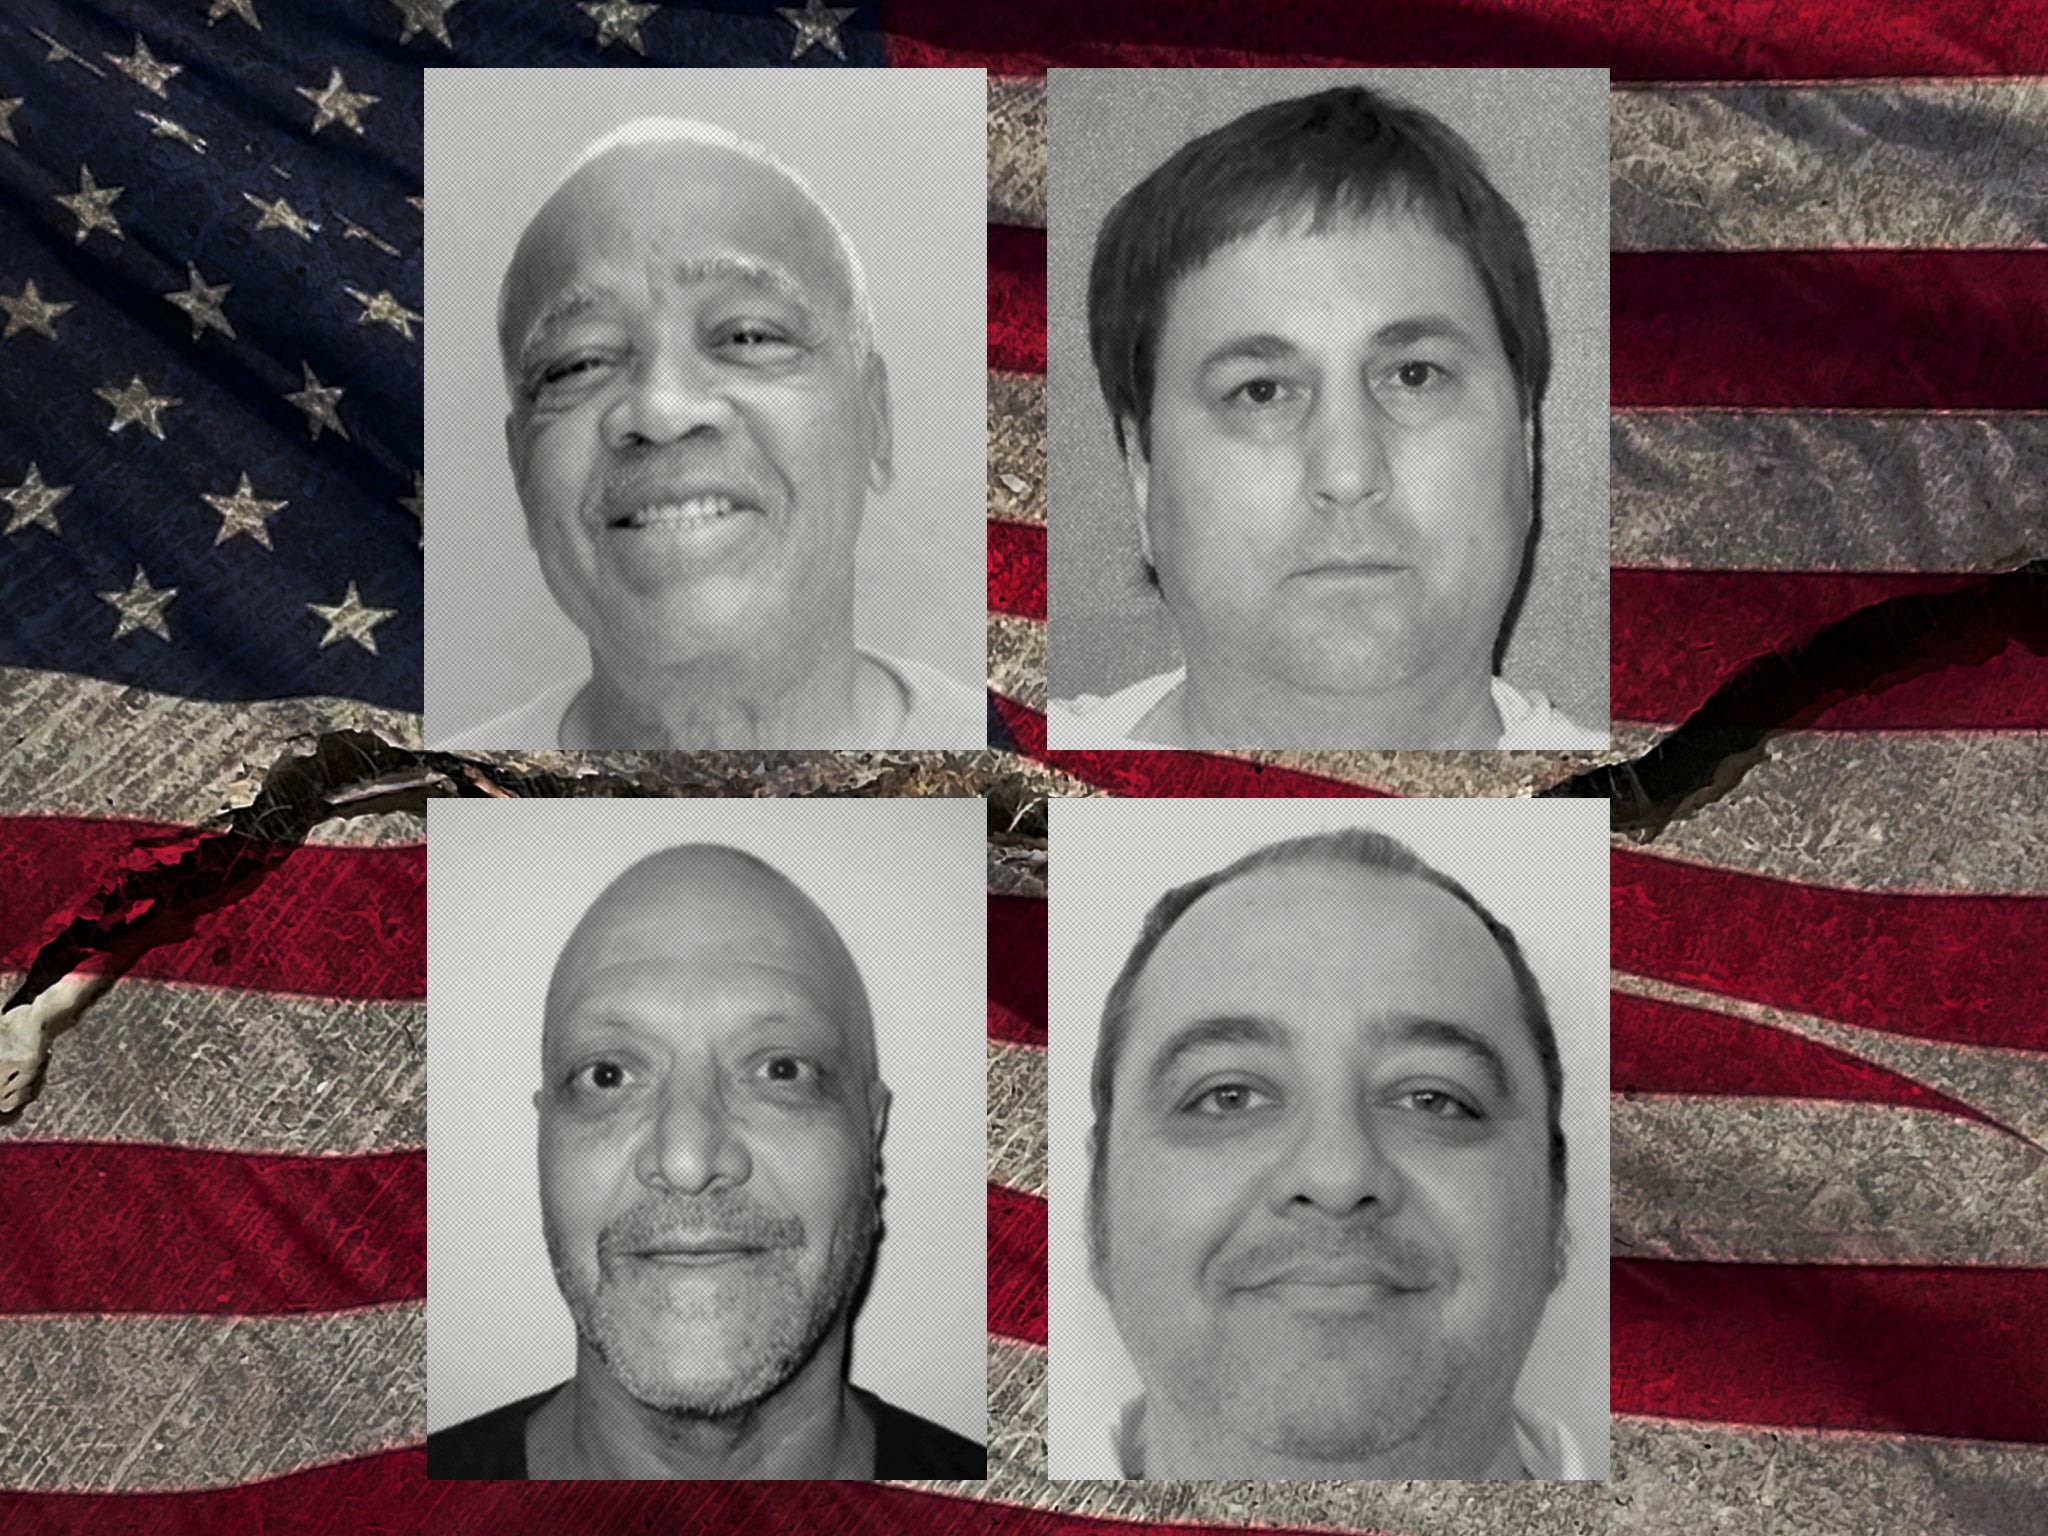 Clockwise from top left: Murray Hooper, Stephen Barbee, Kenneth Eugene Smith and Richard Fairchild